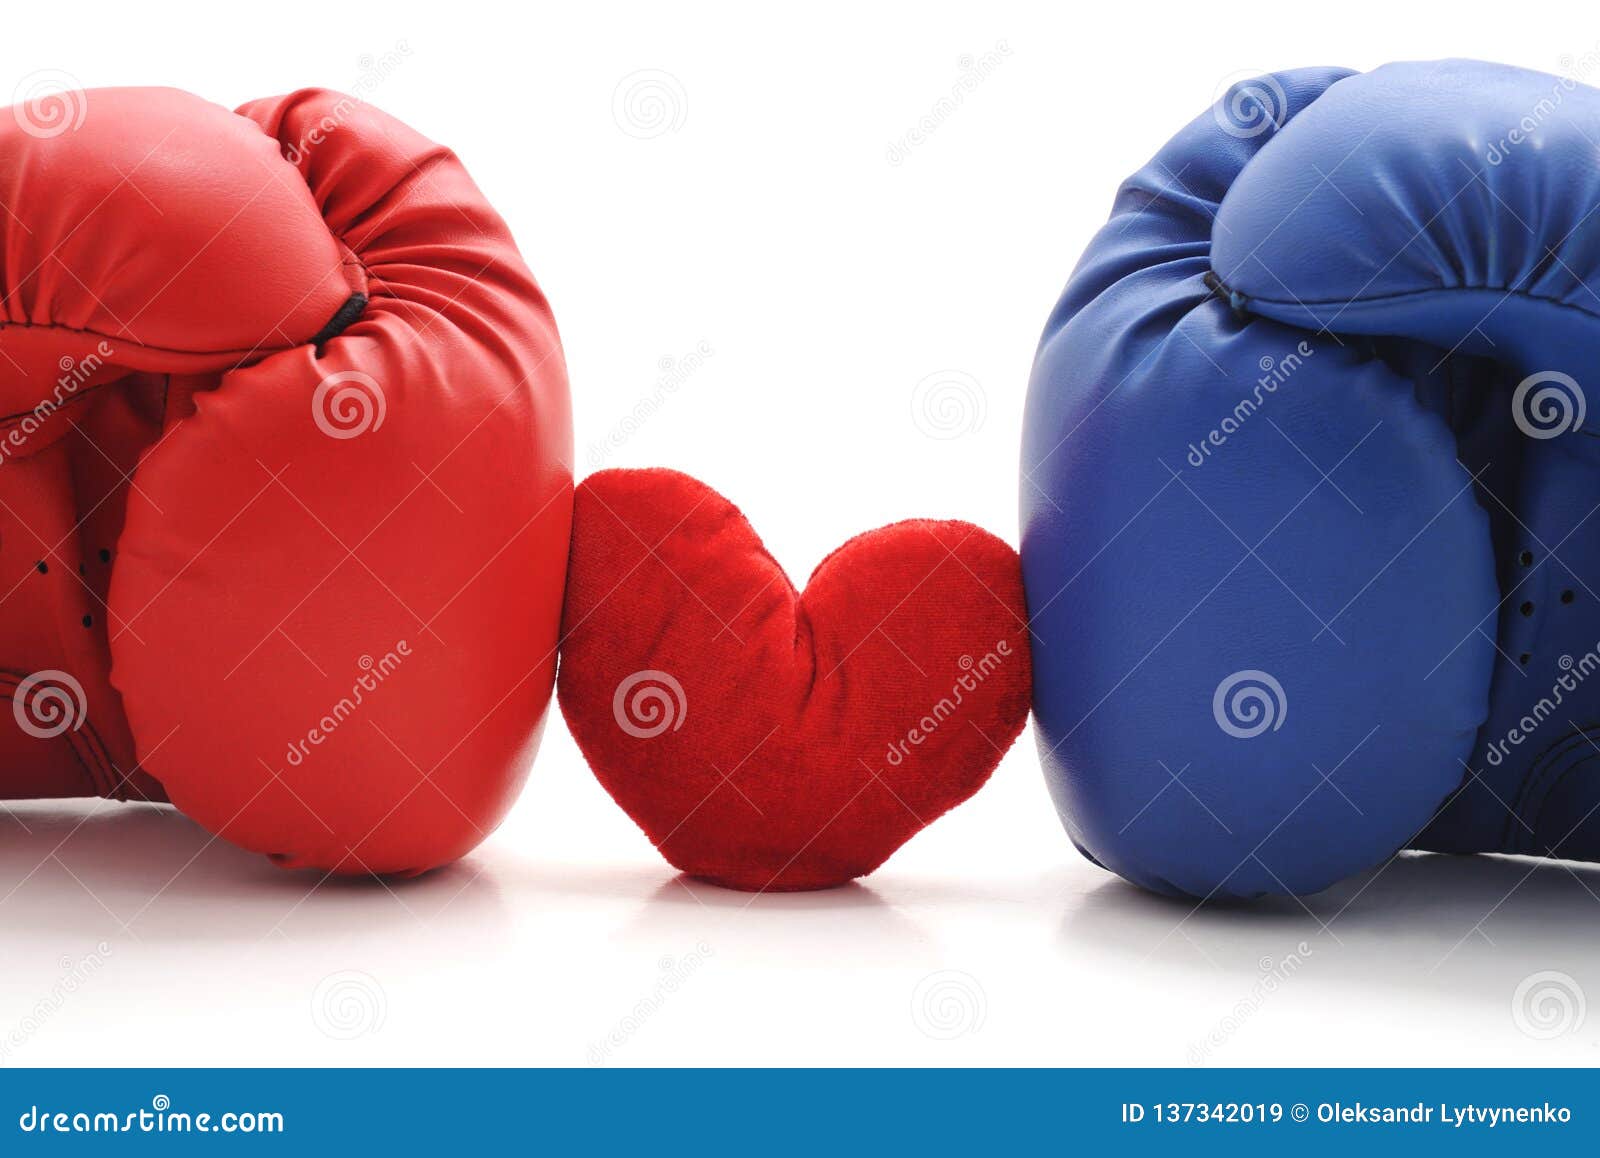 7. "Boxing Gloves and Heart Tattoo" - wide 8